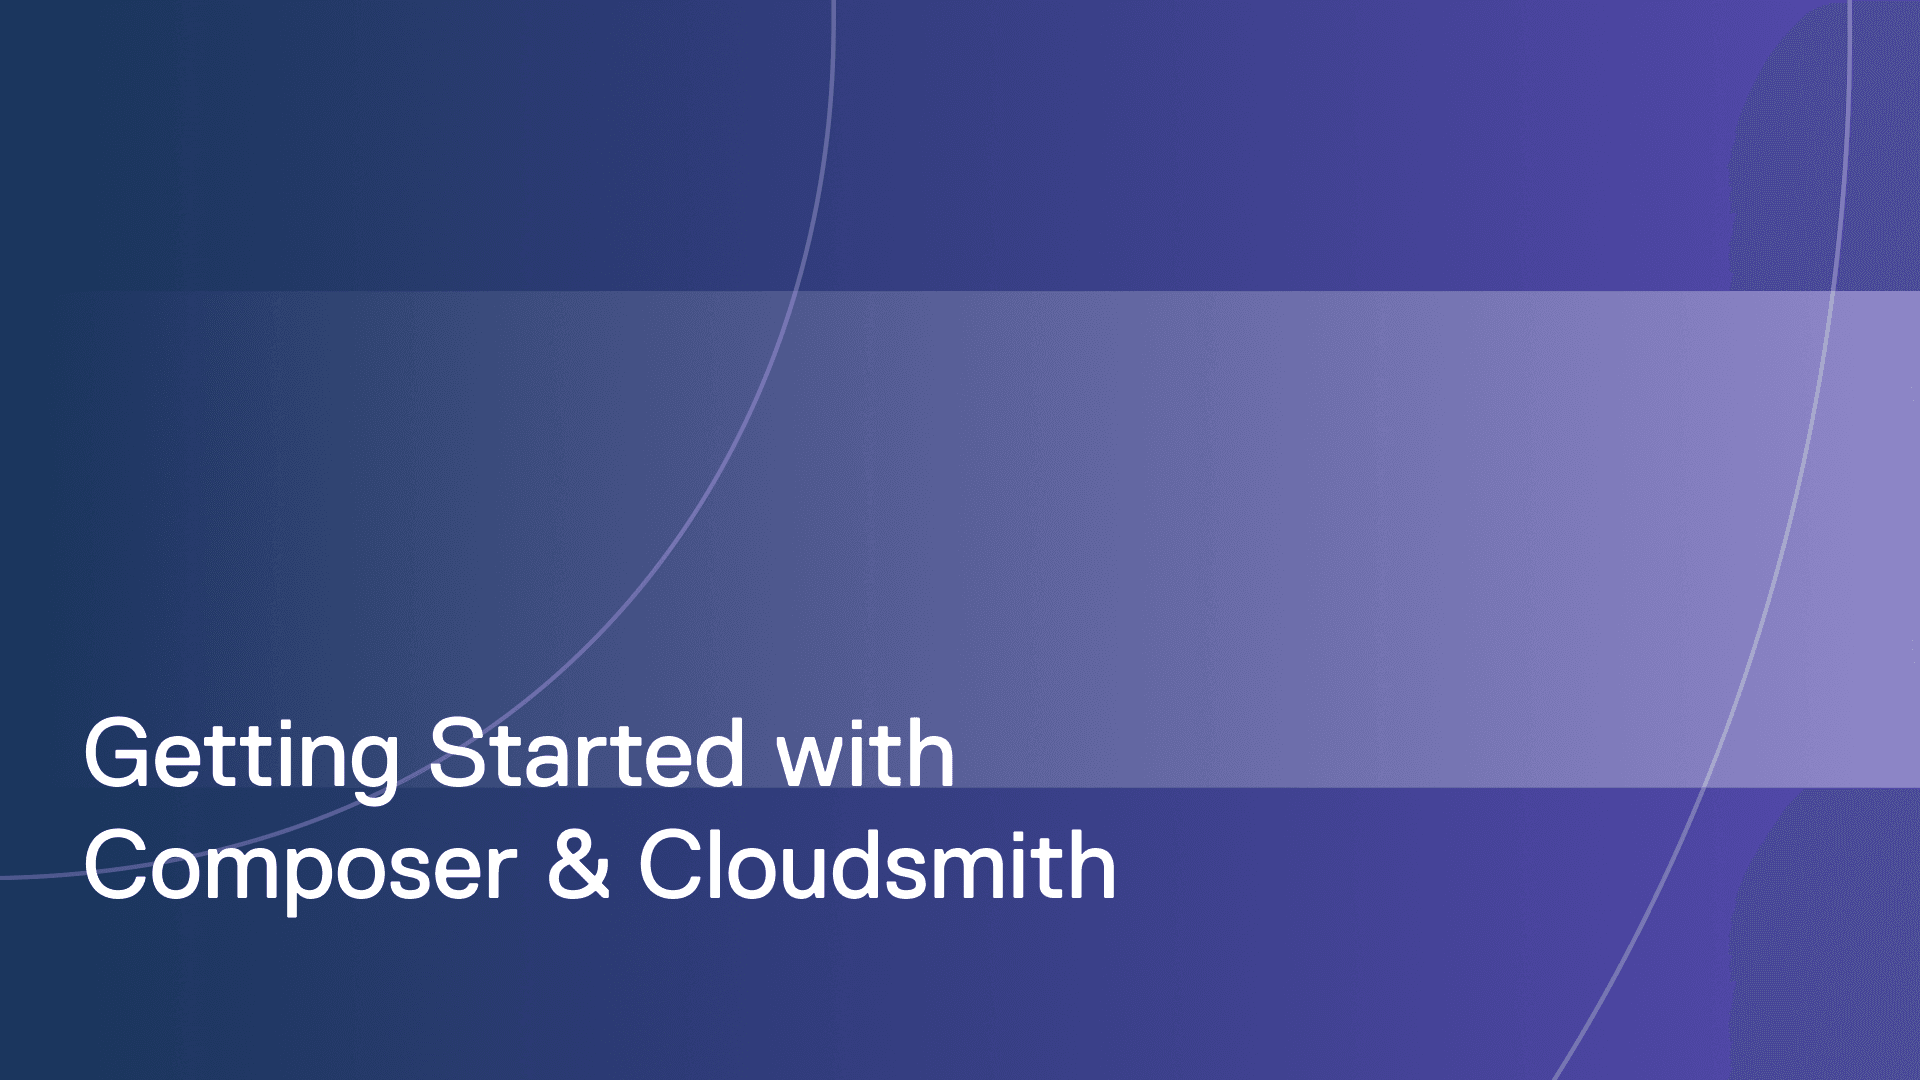 Getting started with Composer and Cloudsmith